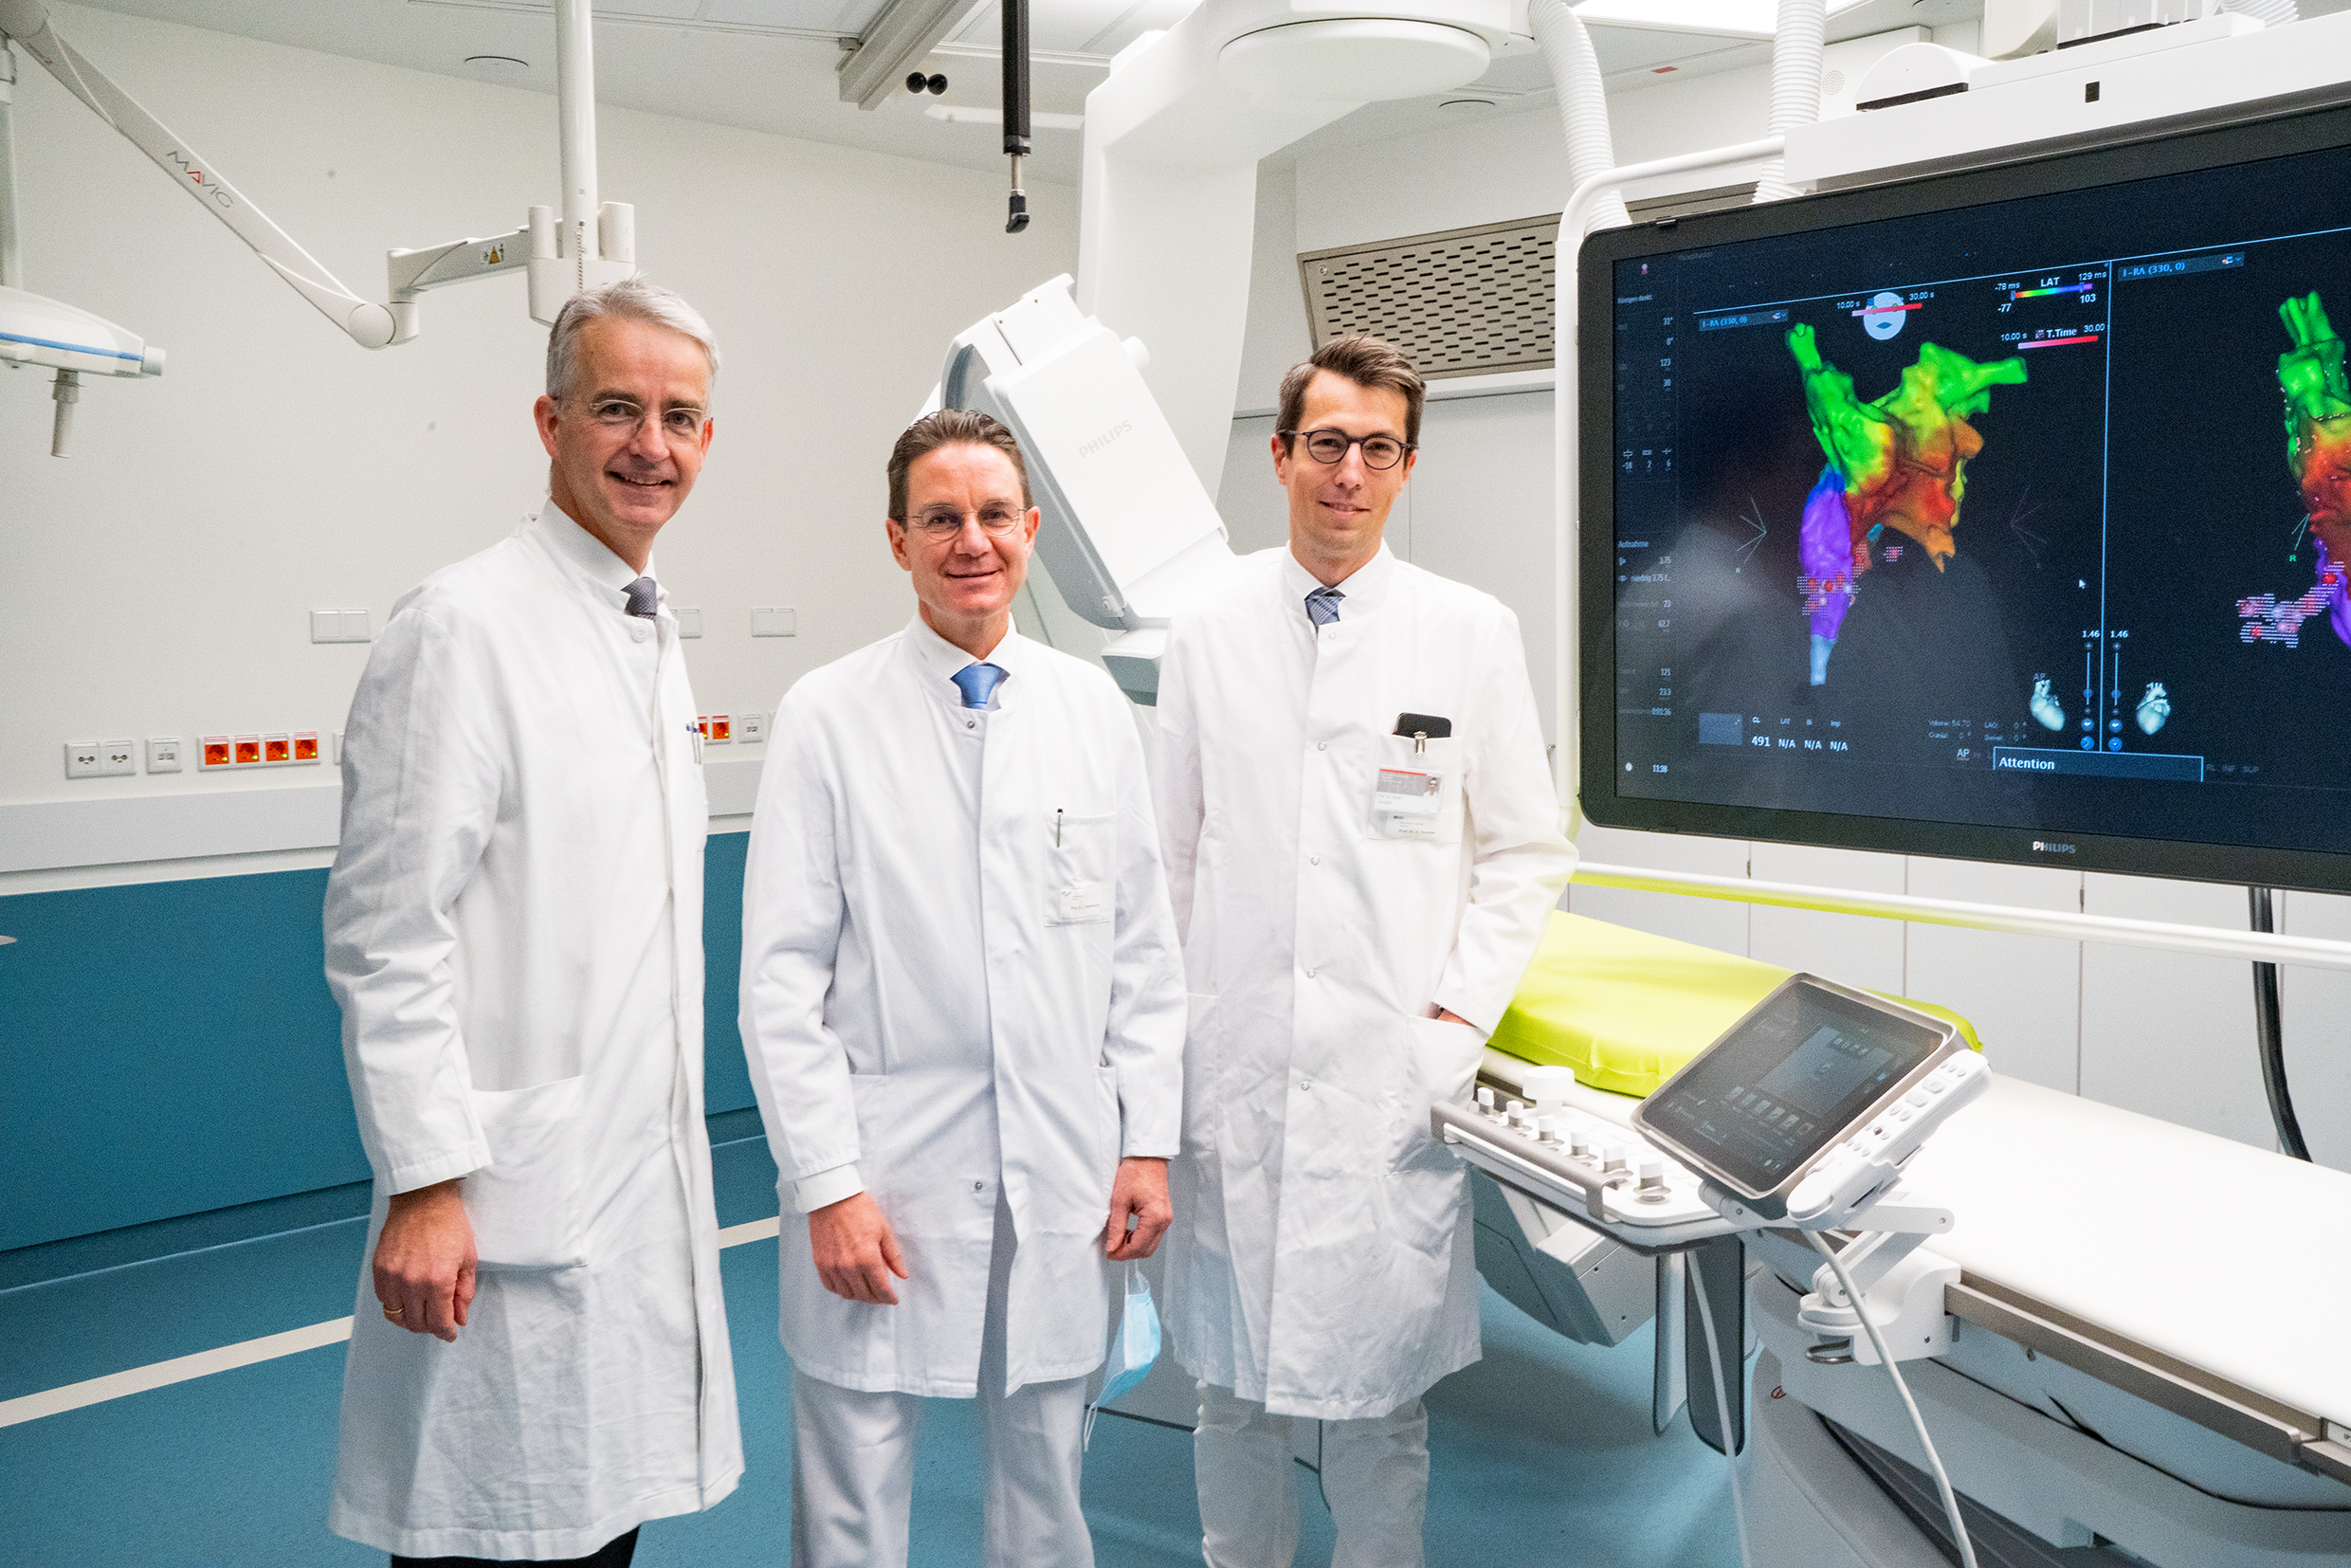 Professor Dr Frank Lammert, Vice-President of the MHH, Professor Dr Johann Bauersachs, Director of the Department of Cardiology and Angiology, and Professor Dr David Duncker, Head of the Hannover Heart Rhythm Centre, stand in the new electrophysiology laboratory. In the background are screens with colour 3-D images of the heart.